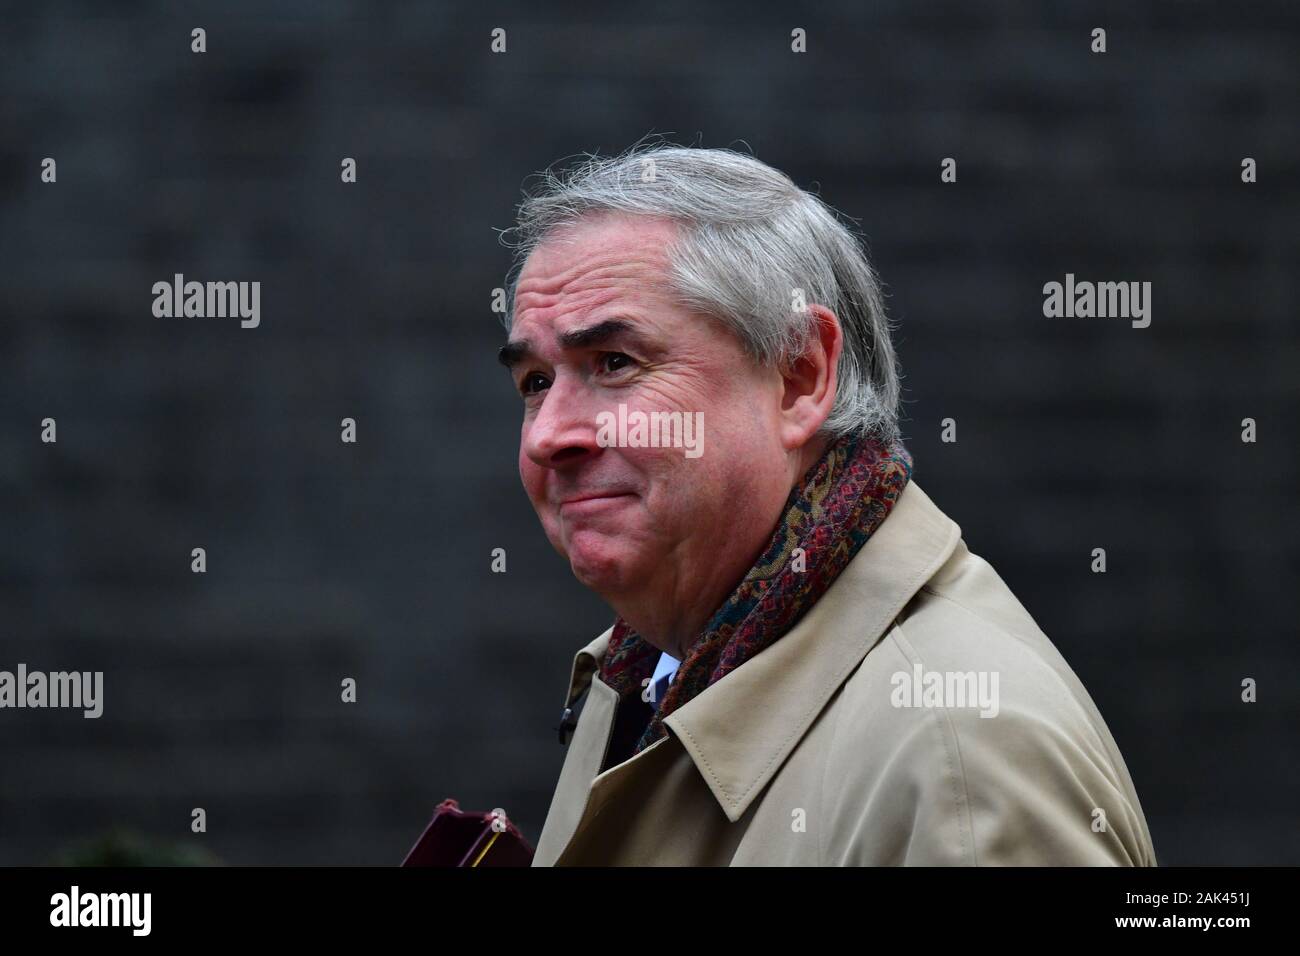 Downing Street, London, UK. 7th January 2020. Geoffrey Cox QC, Attorney General in Downing Street for weekly cabinet meeting. Credit: Malcolm Park/Alamy Live News. Stock Photo